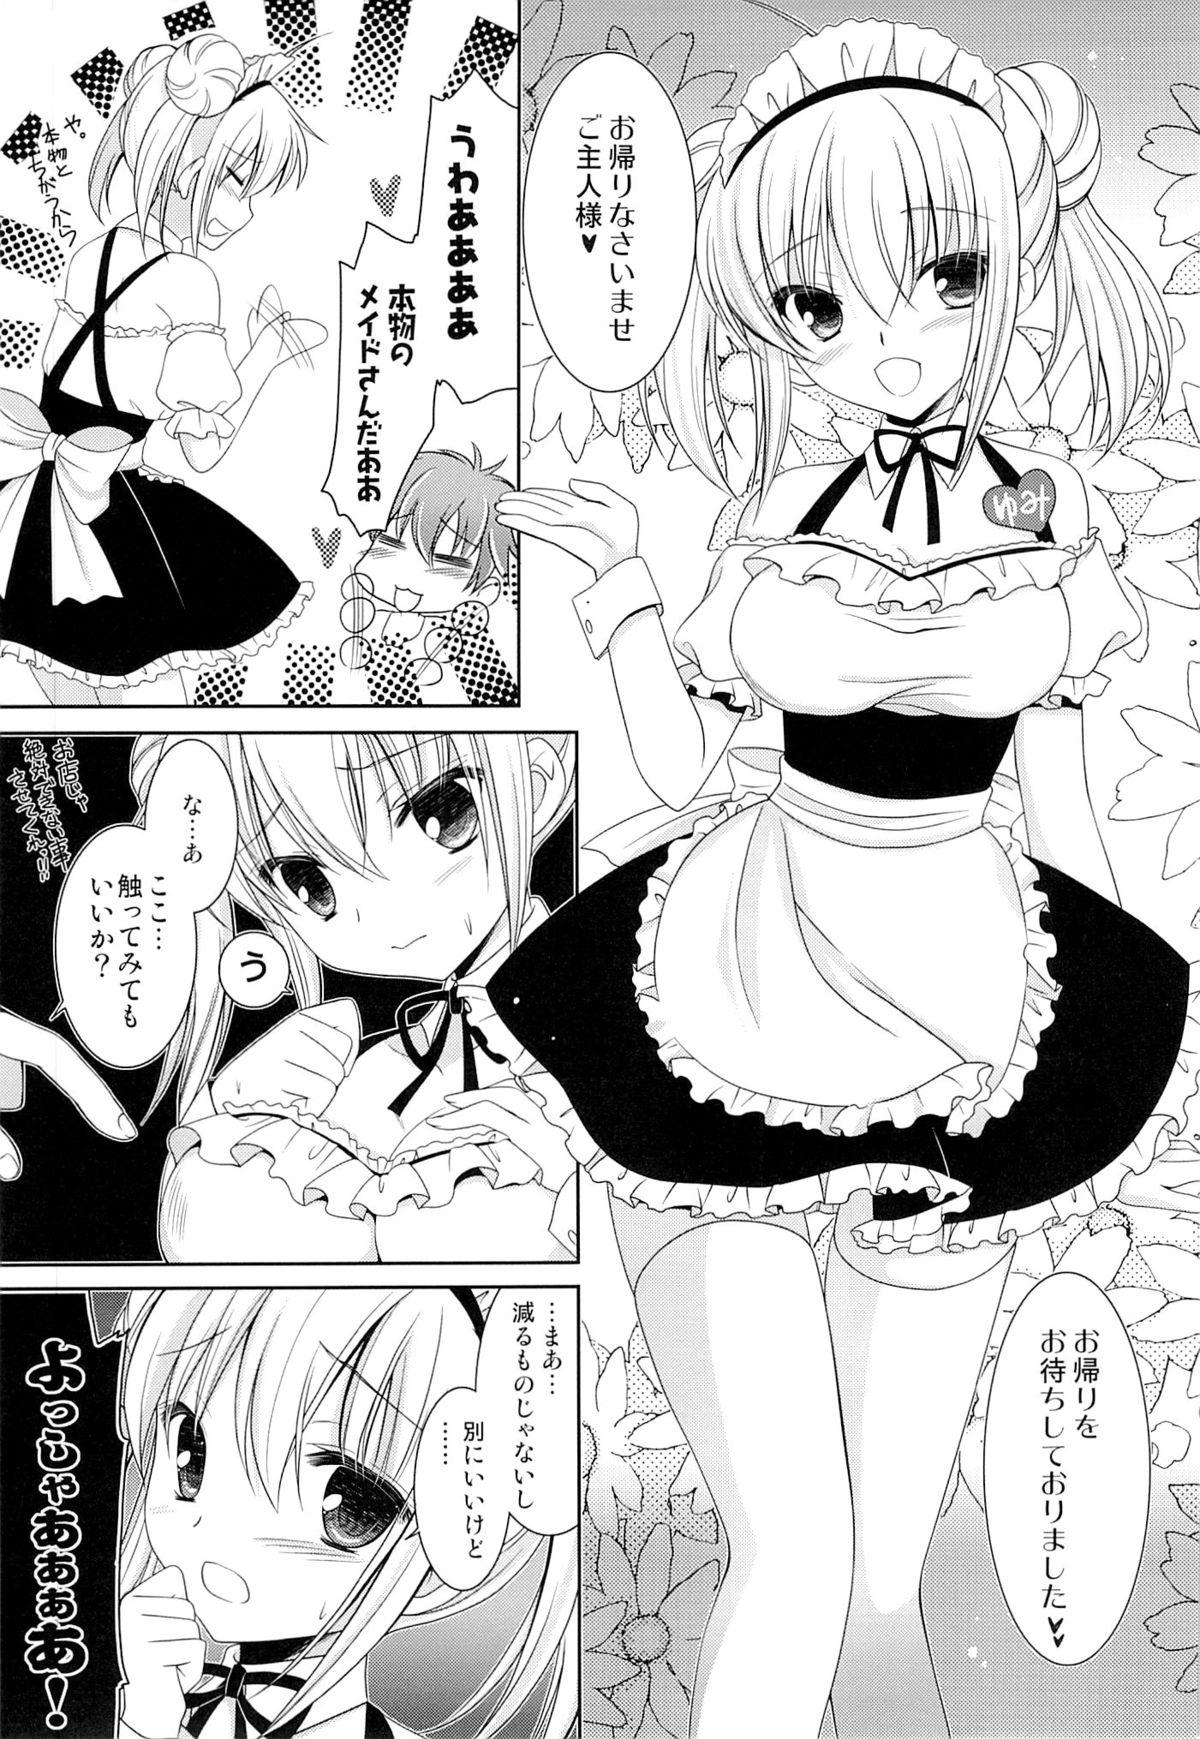 Ametuer Porn Imouto Maid Penetration - Page 6